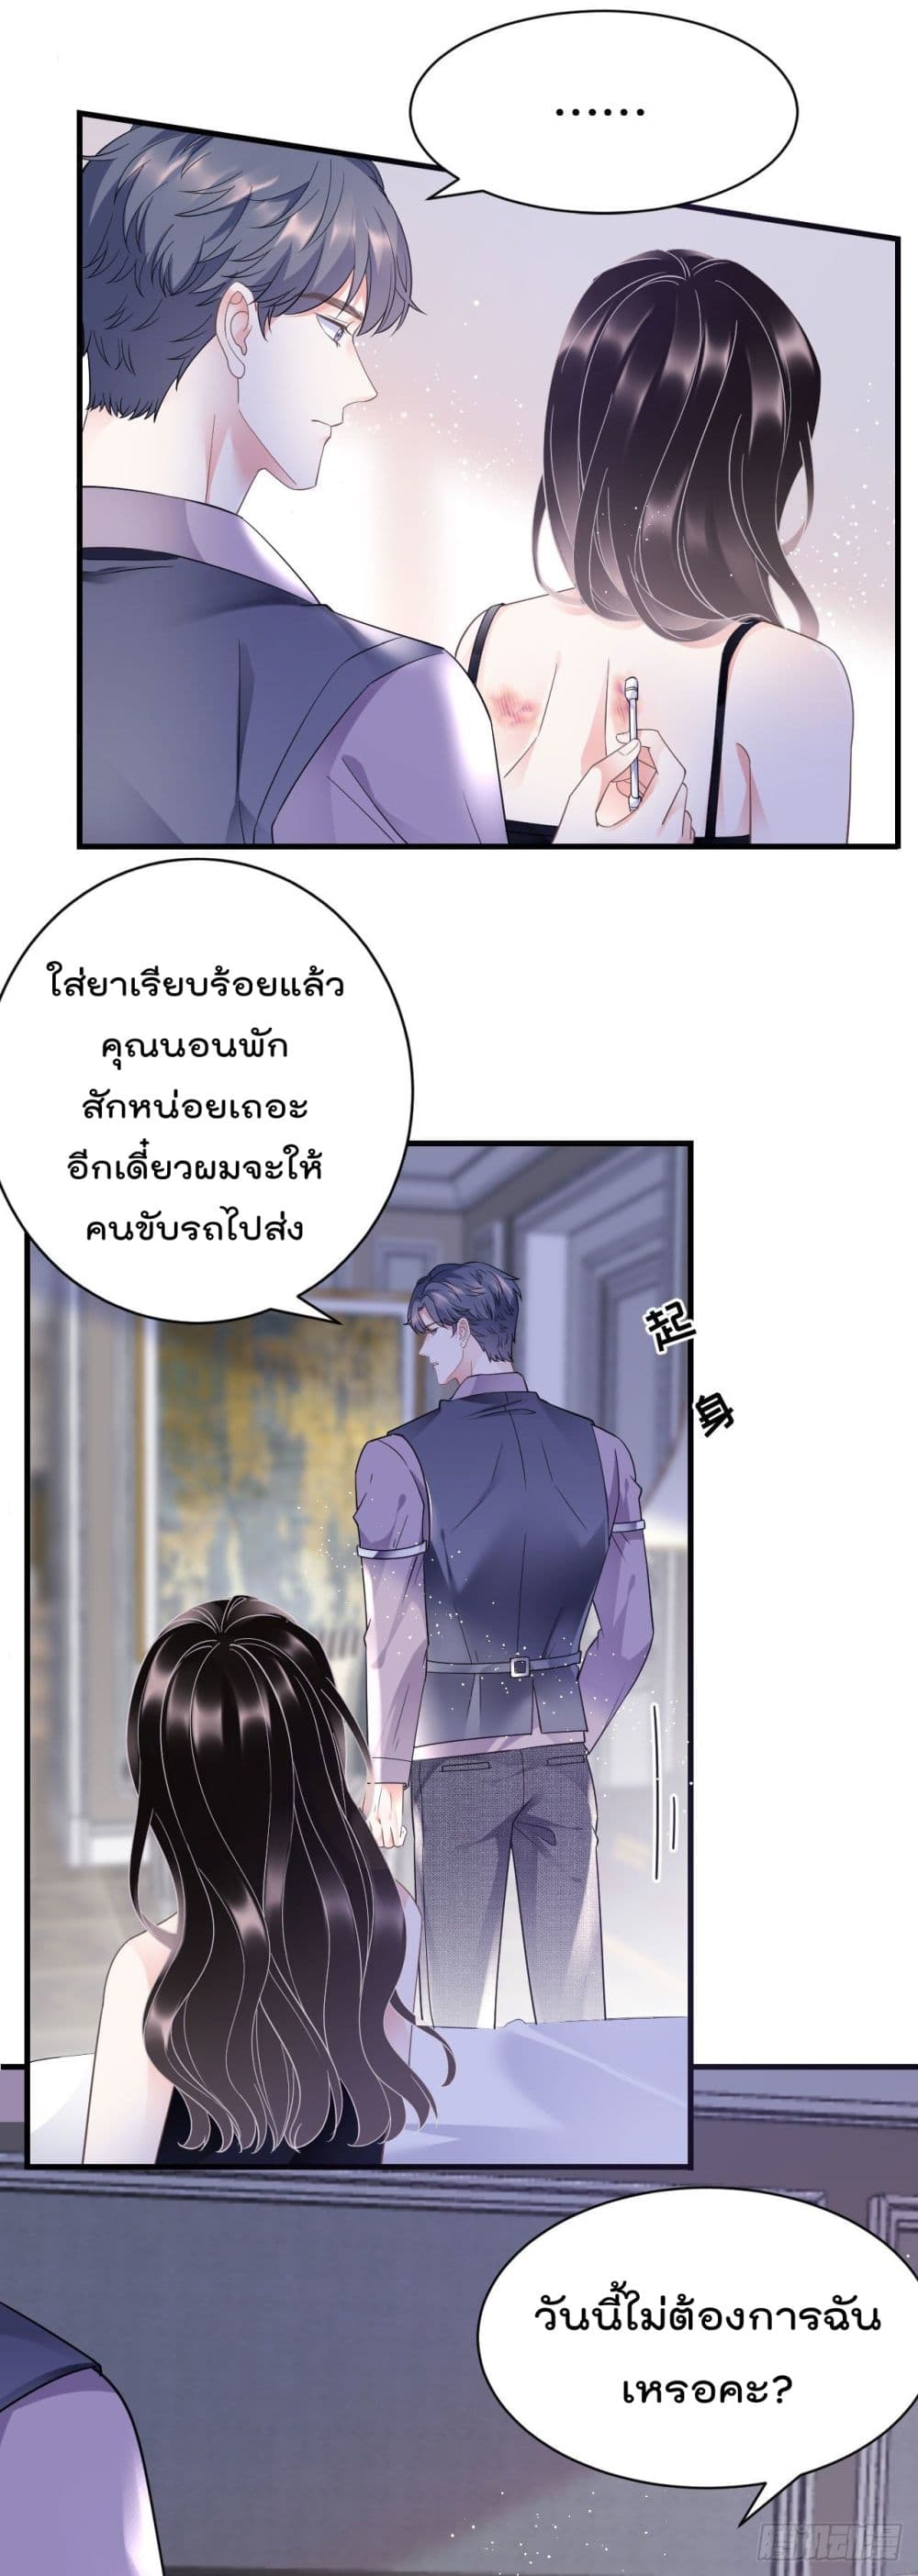 What Can the Eldest Lady Have คุณหนูใหญ่ ทำไมคุณร้ายอย่างนี้ 12-12